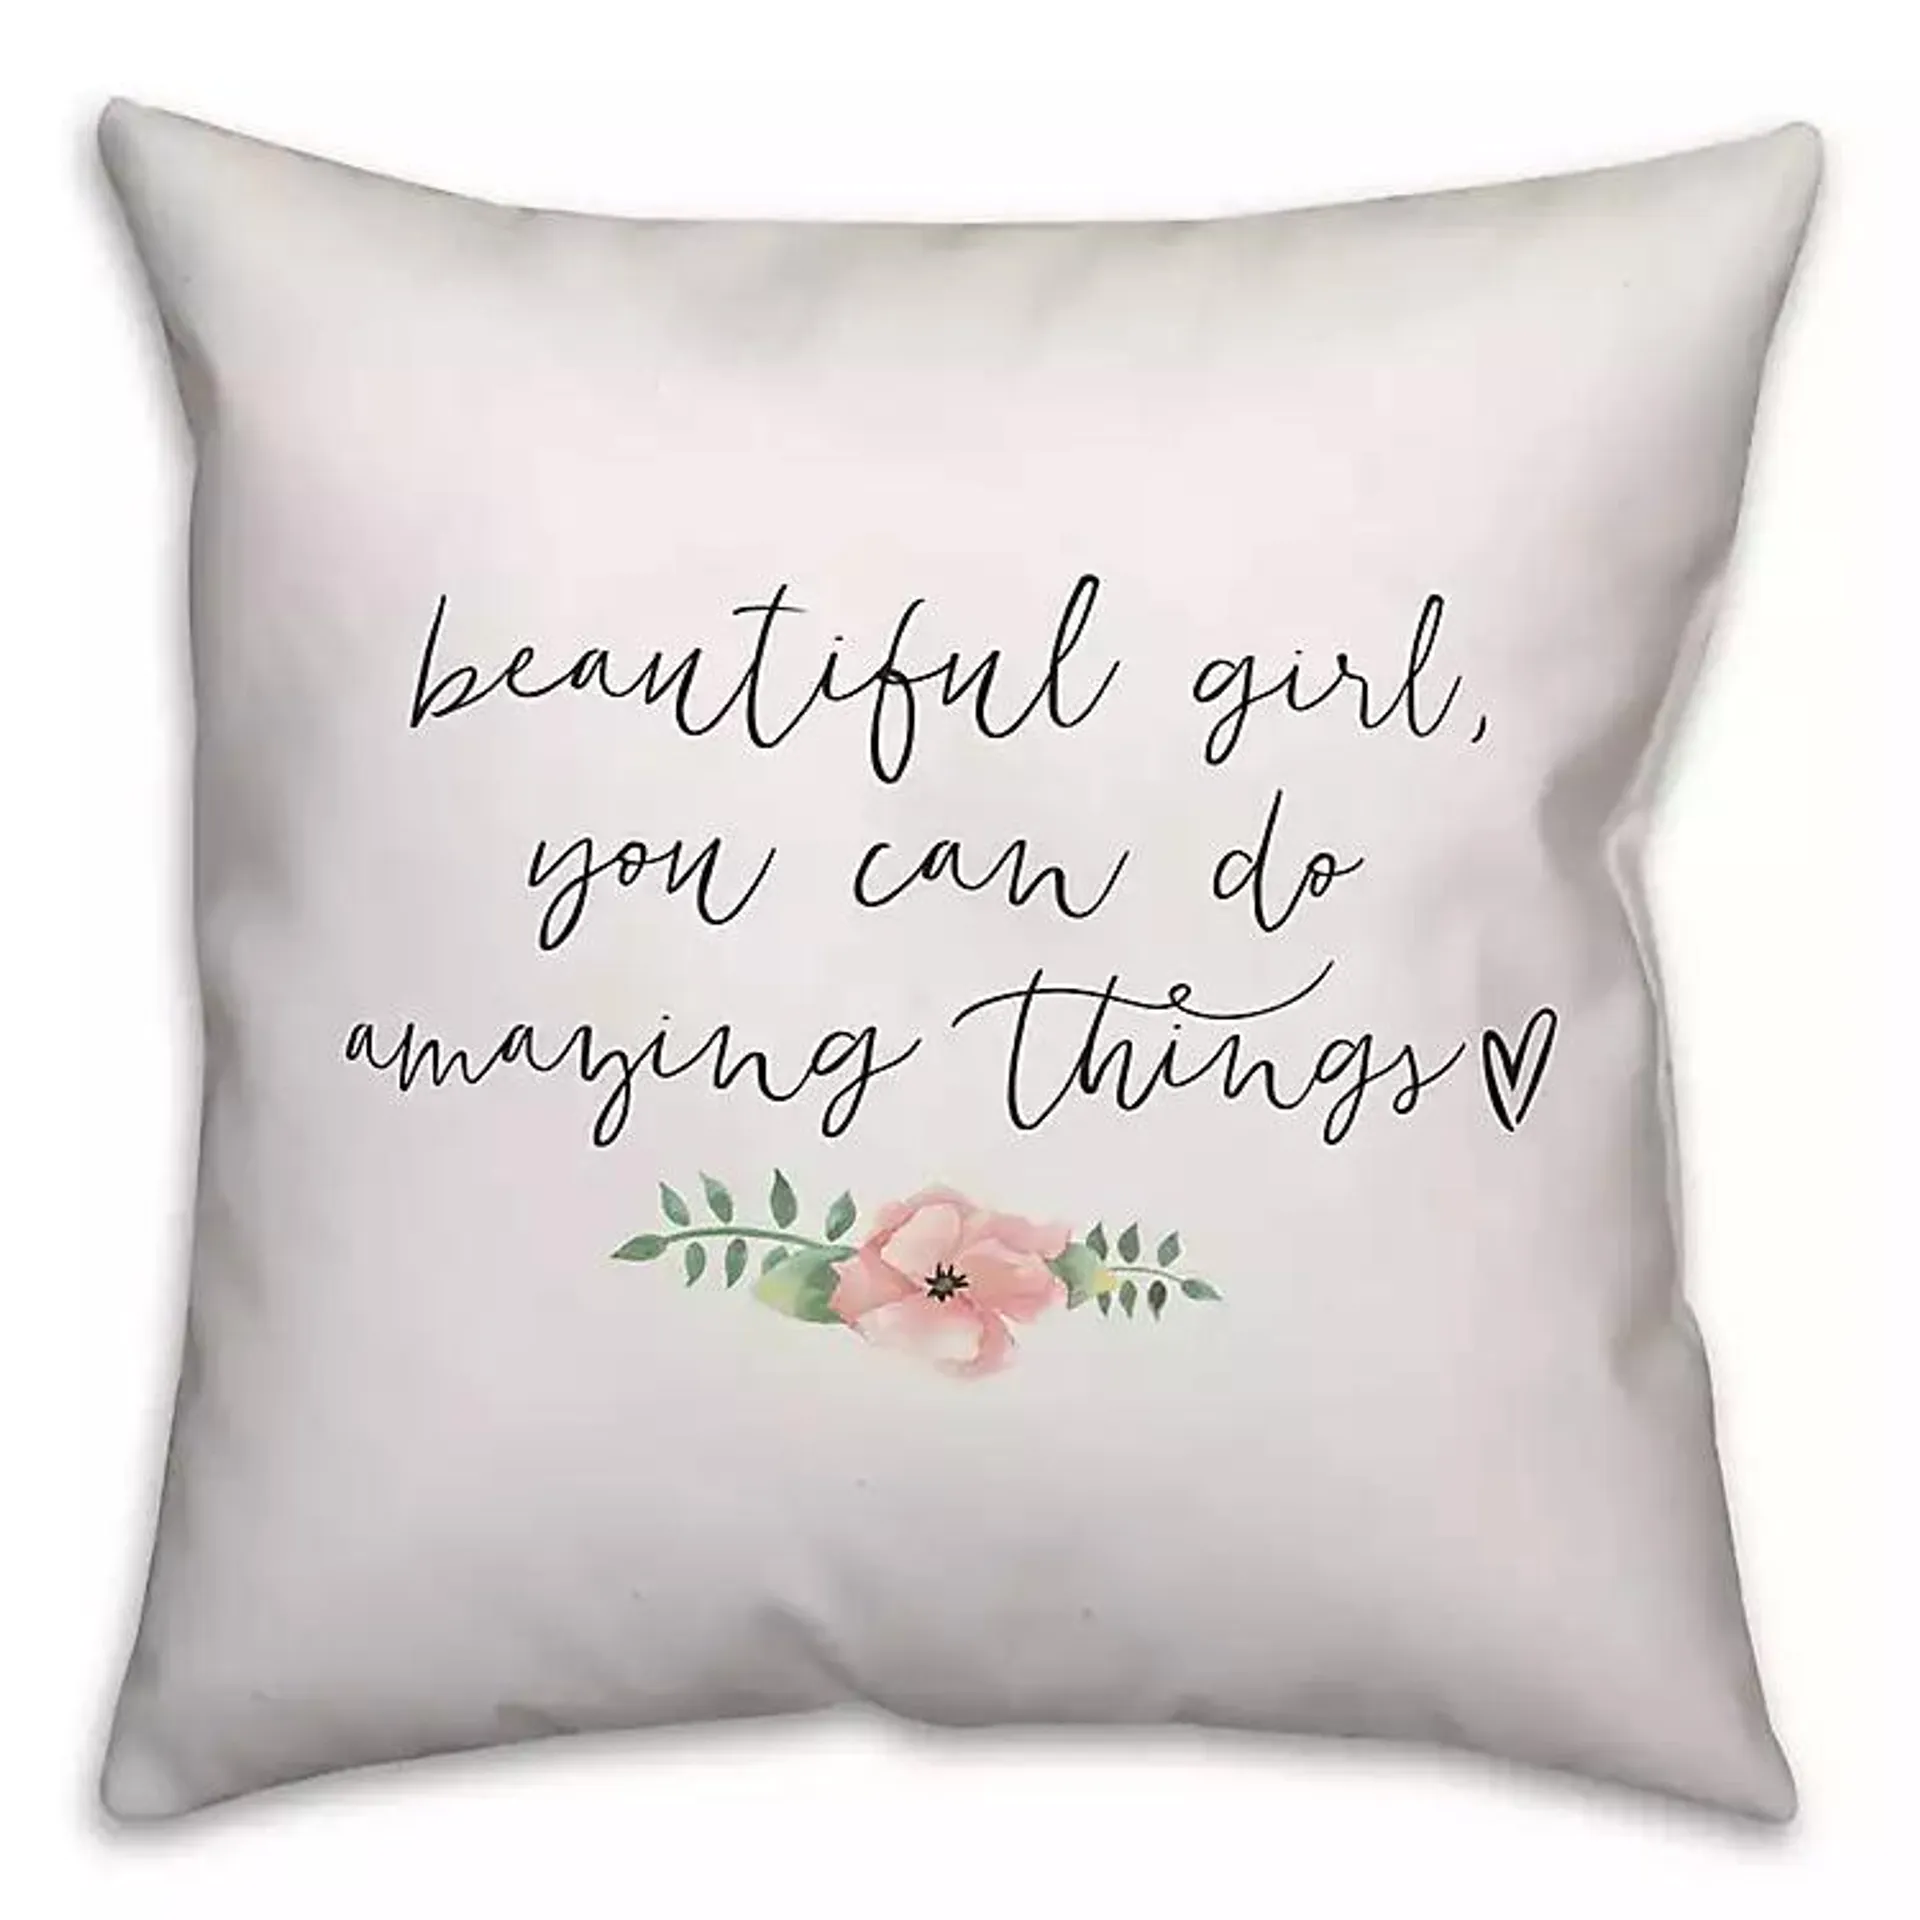 Amazing Things Pillow